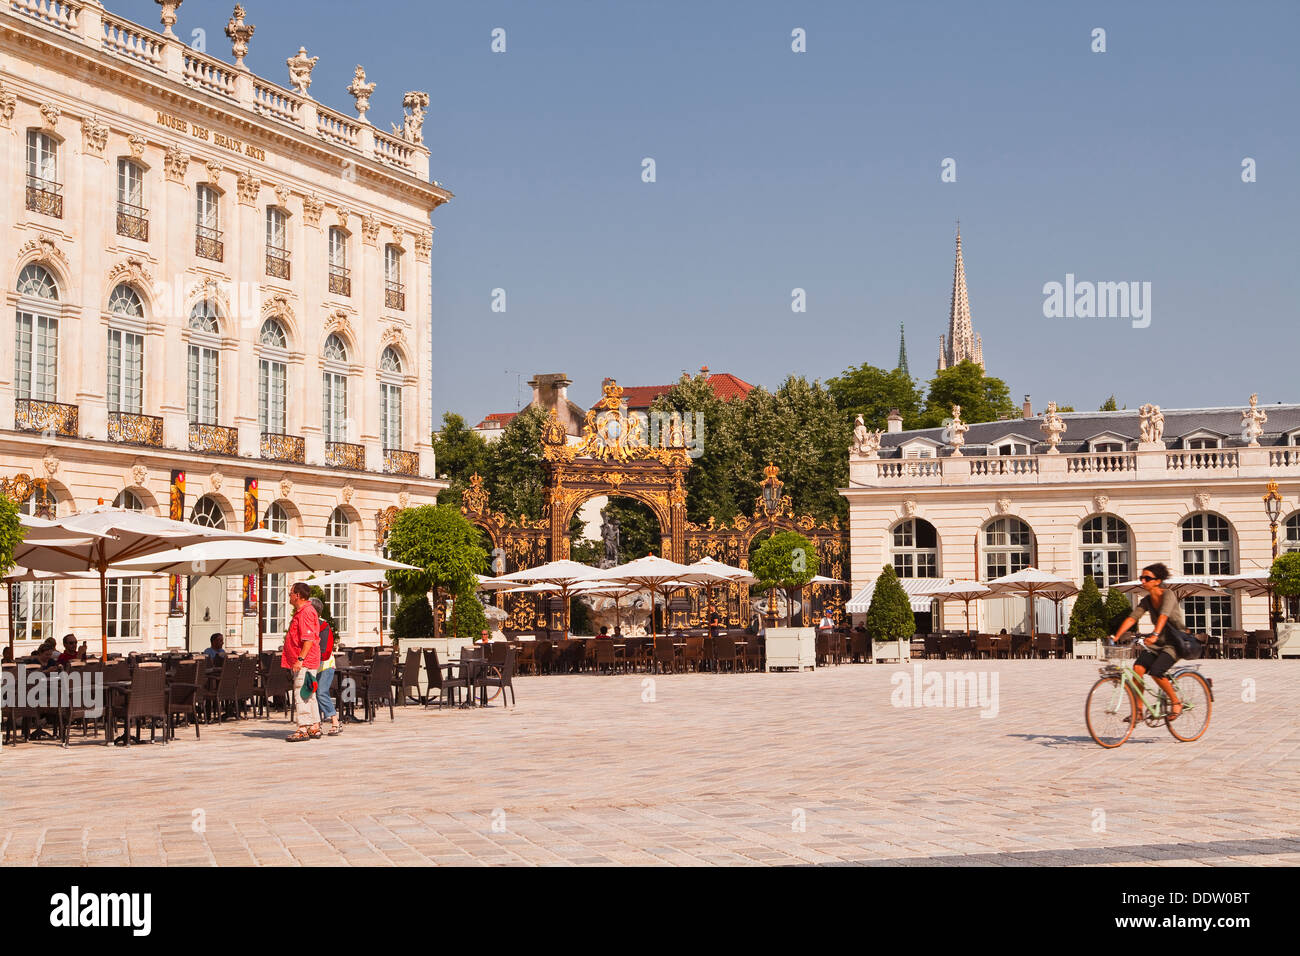 Place Stanislas in the heart of the french city of Nancy. It was designated a UNESCO World Heritage Site in 1983. Stock Photo